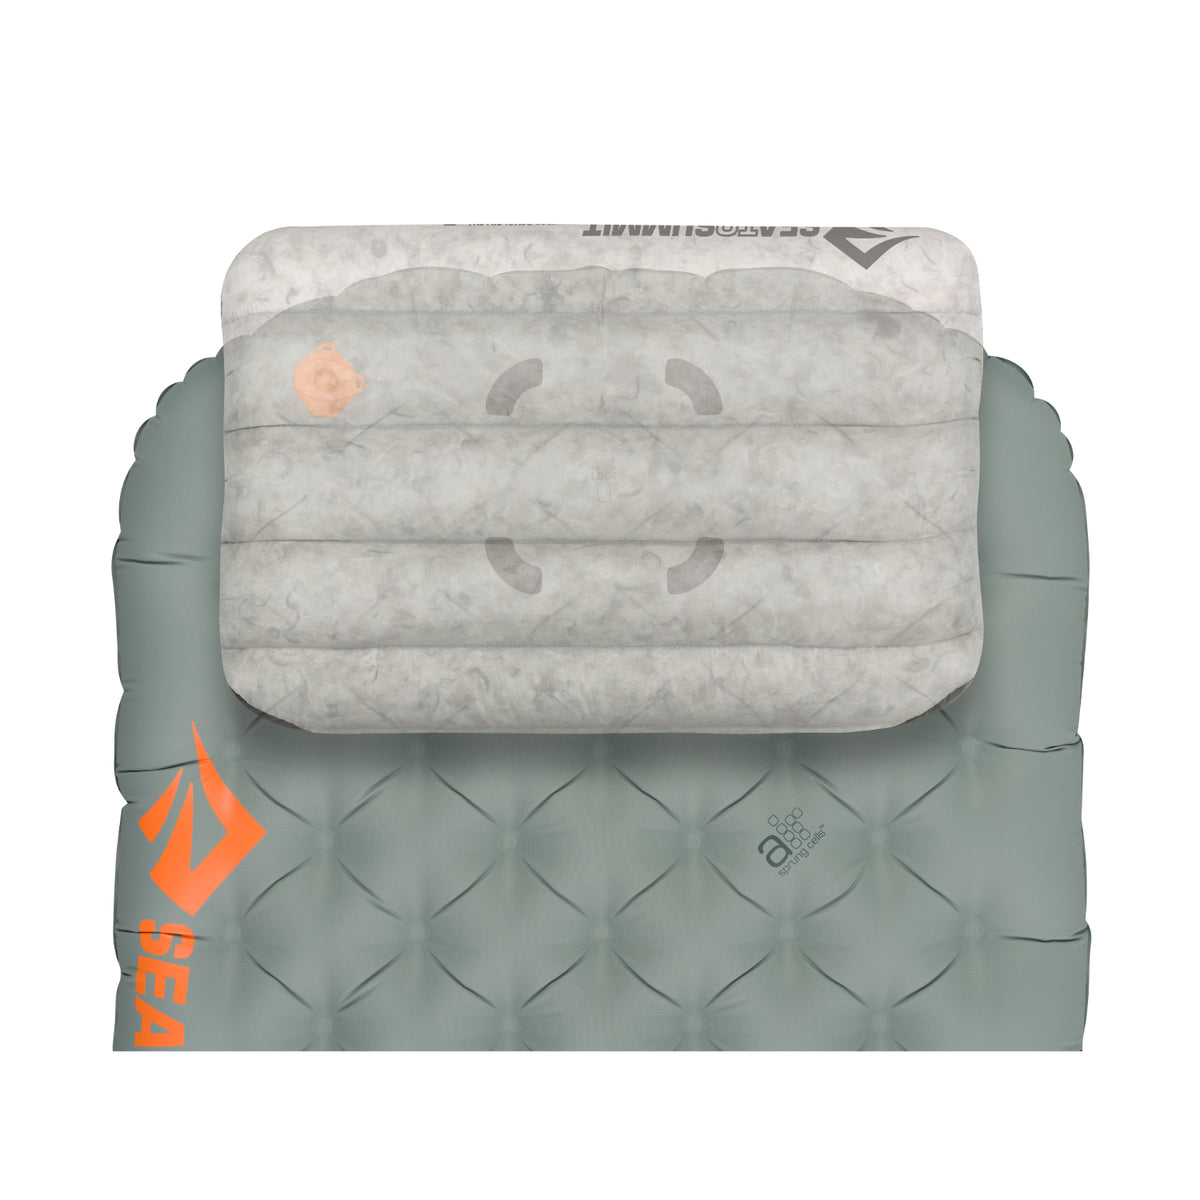 Sea to Summit Aeros Down Pillow showing how it attaches to a sea to summit sleeping mattress